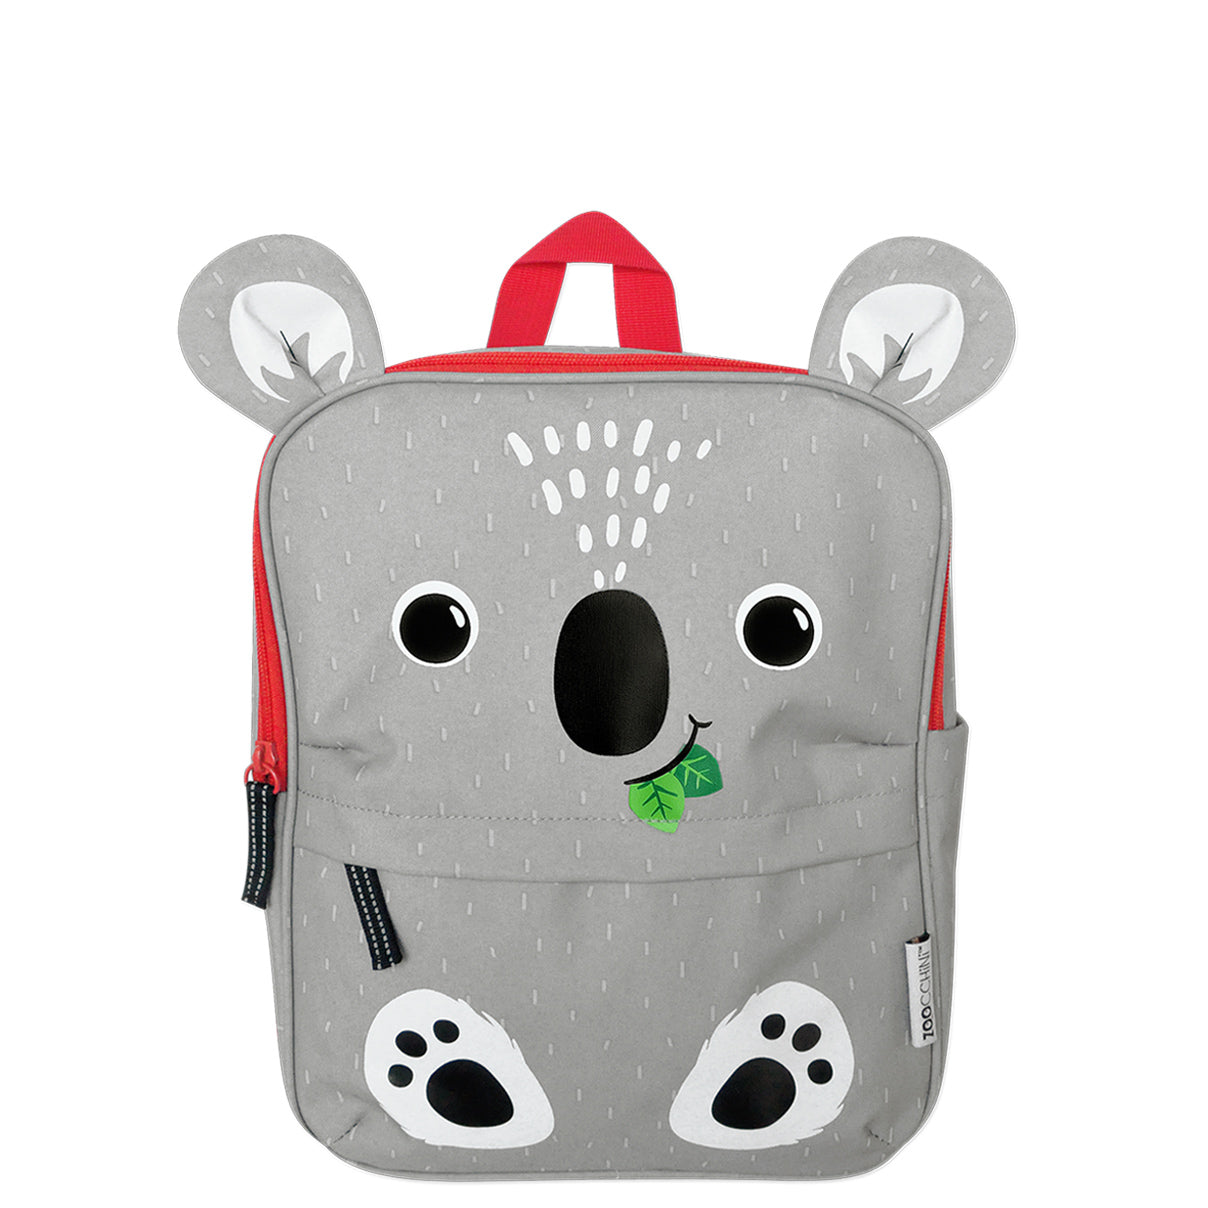 Zoocchini Toddler Kids Pencil Case Pouch Organizer - Duffy The Dog